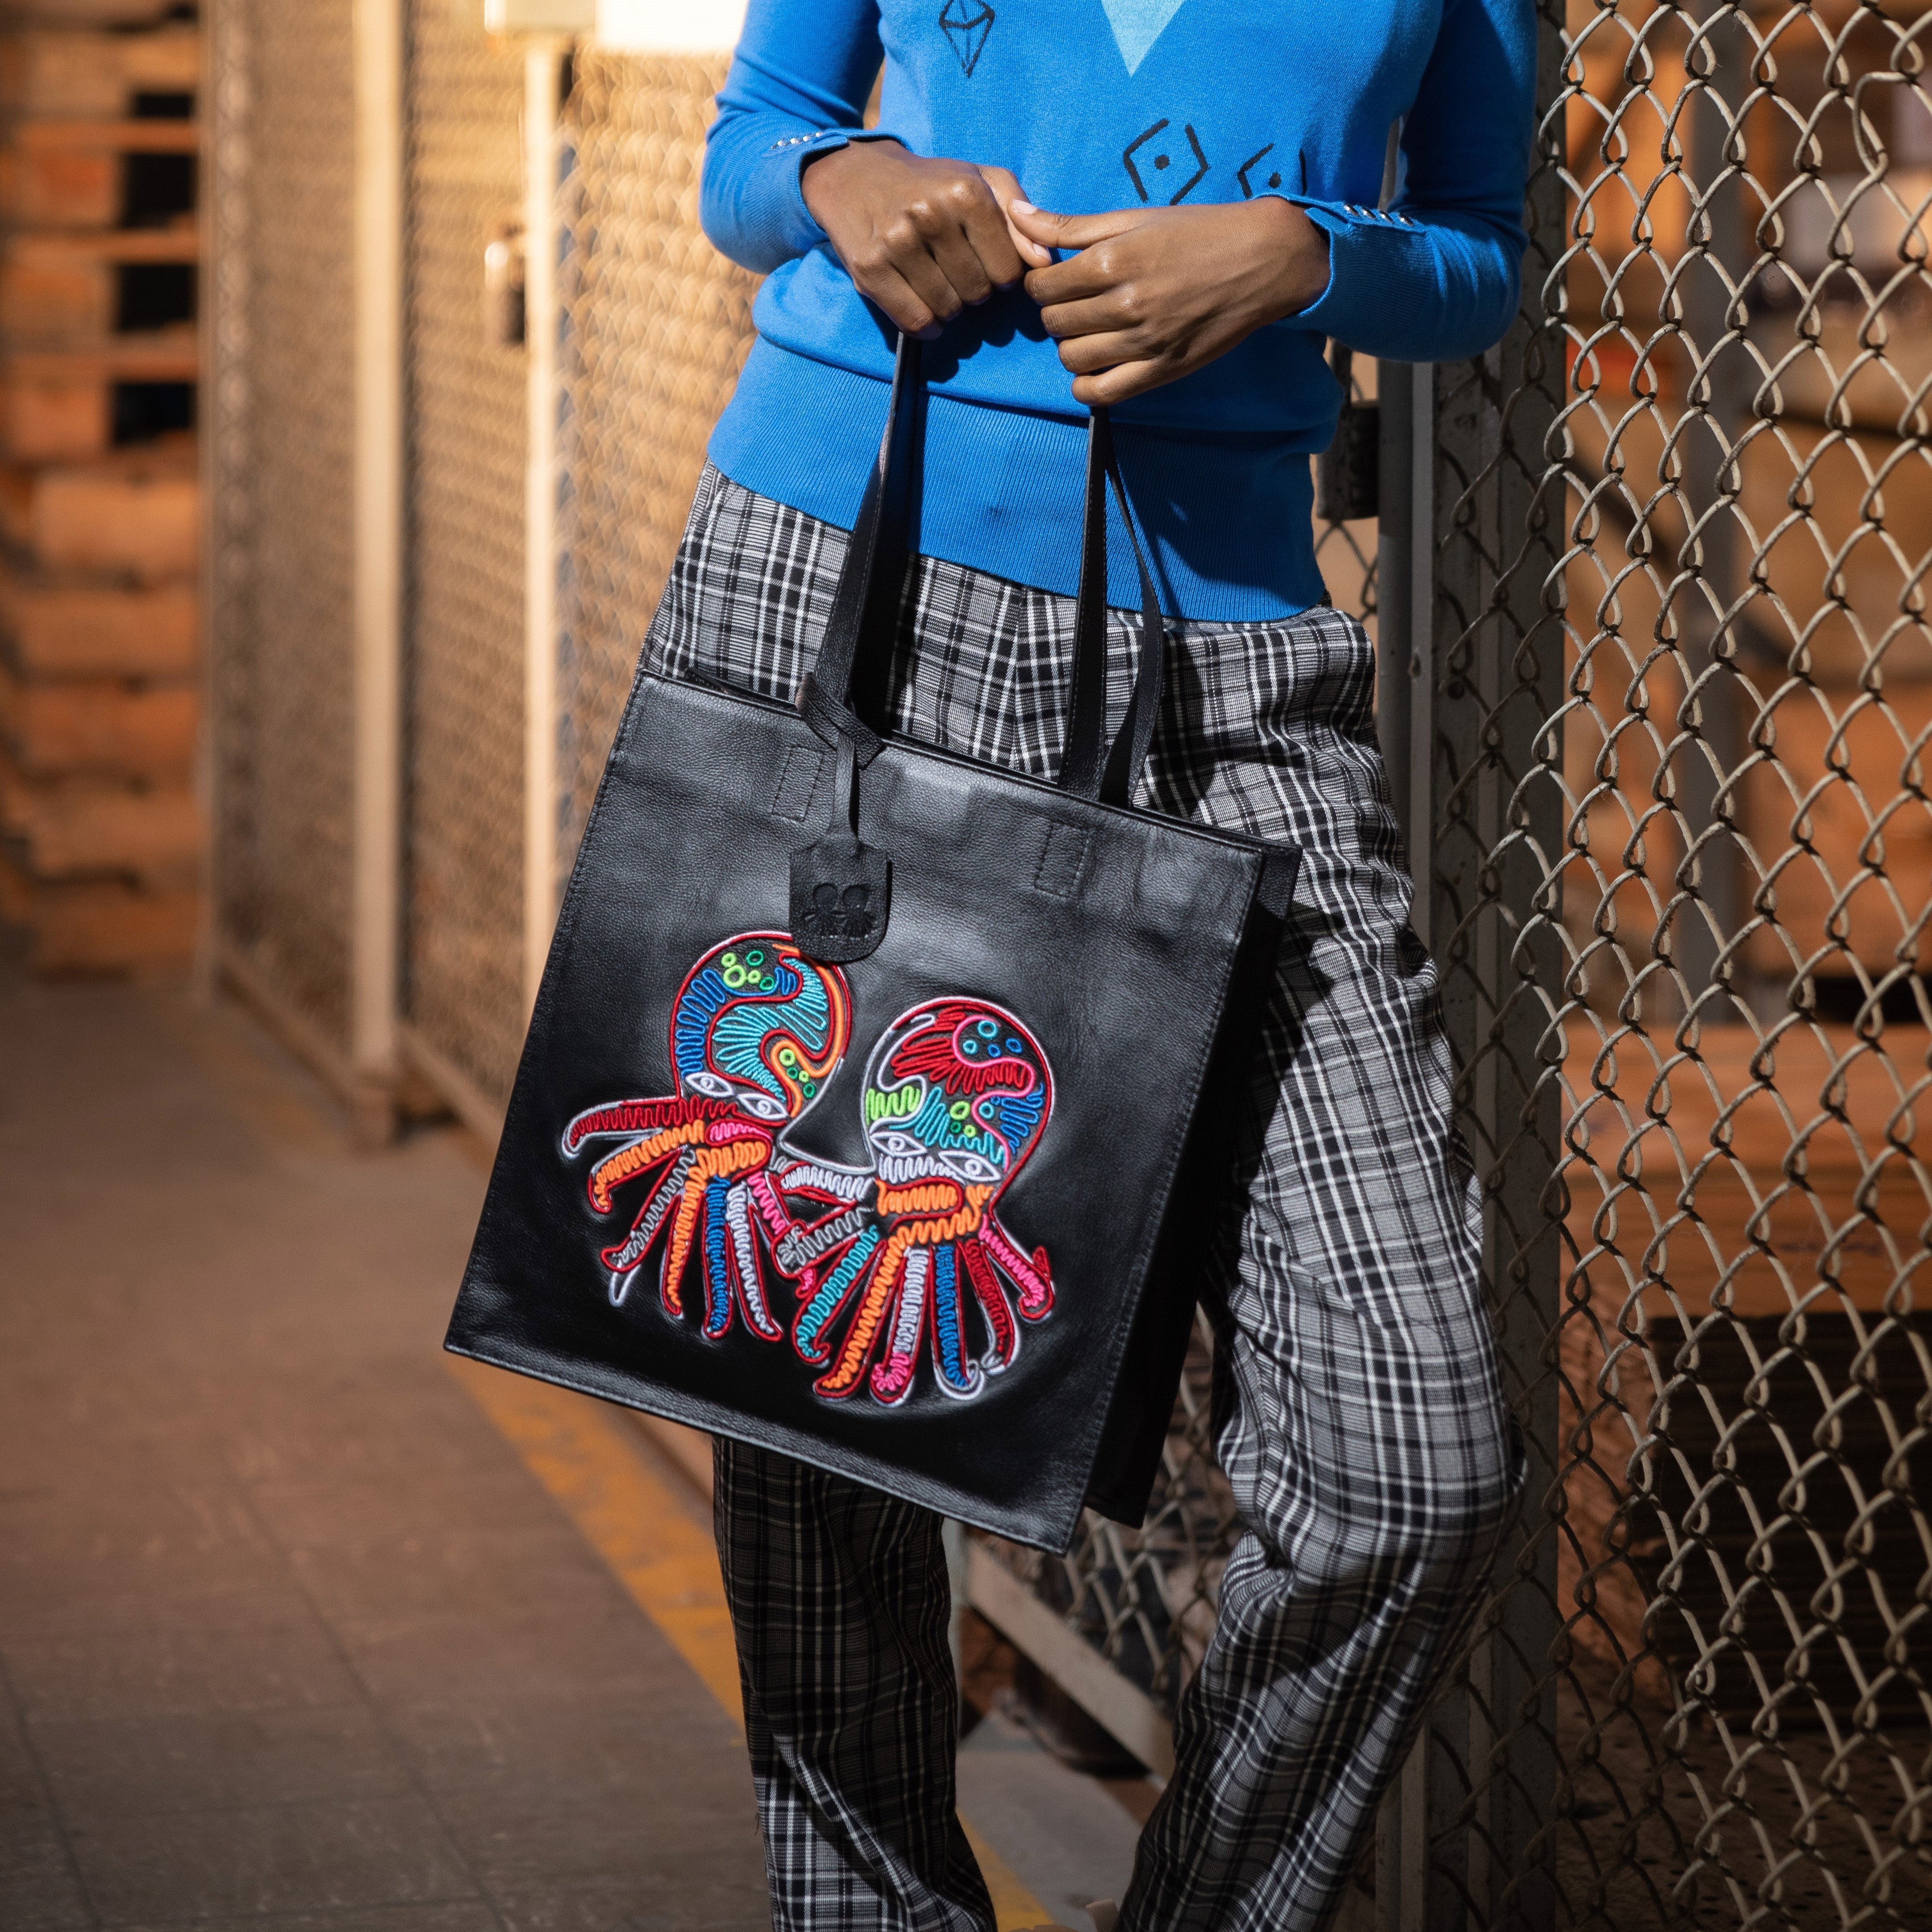 Black Leather Tote Bag - Multicolored Octopus Cord Embroidery - Model